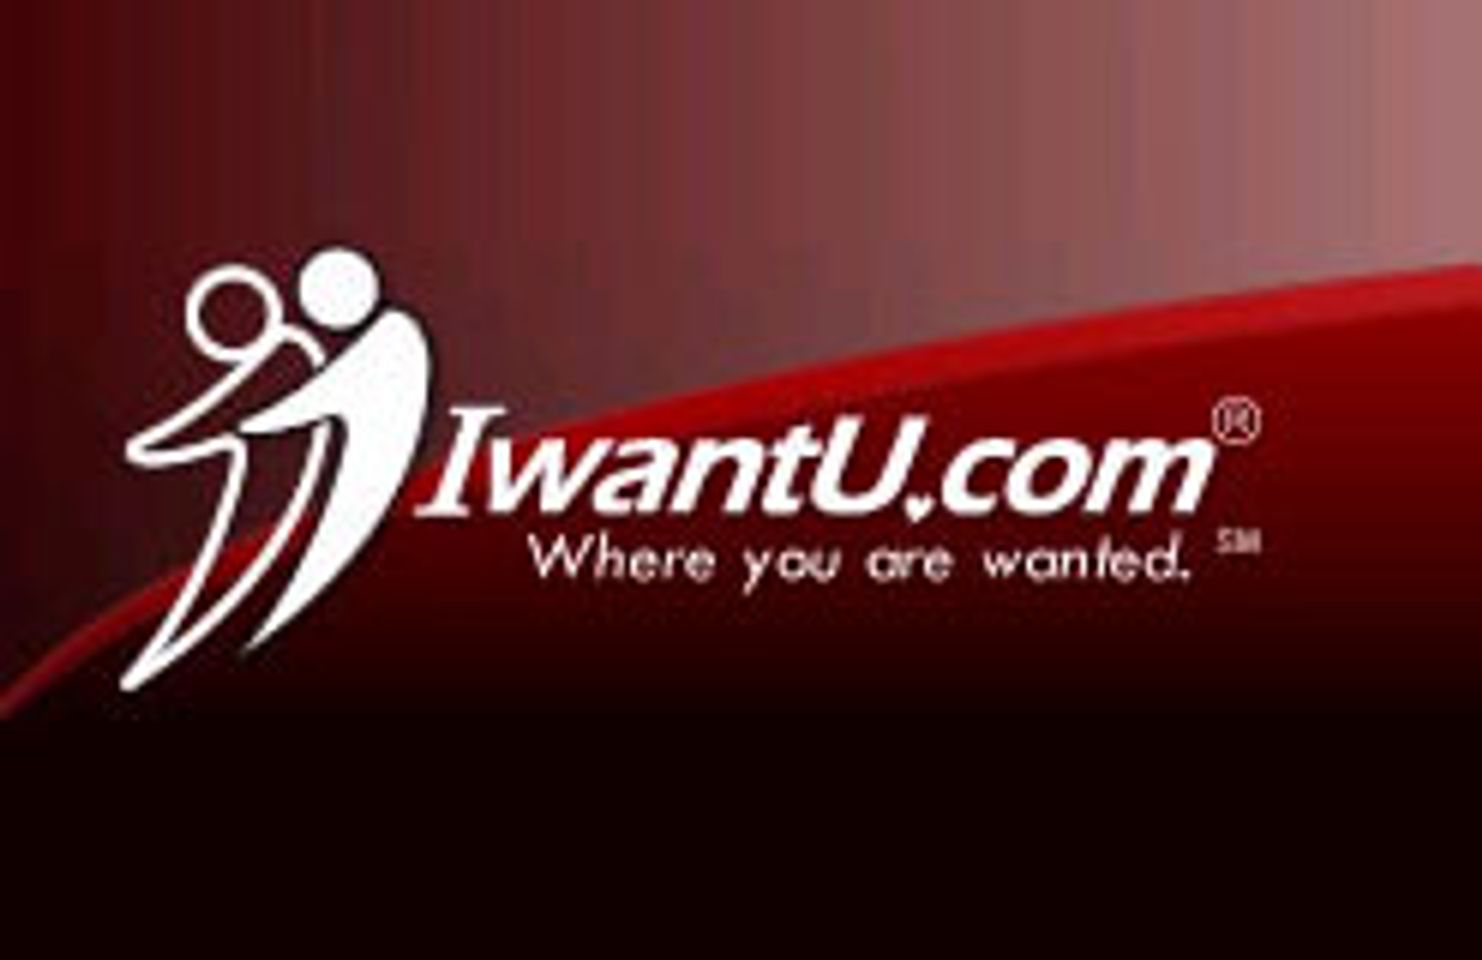 IwantU.com Offers Cure for Webmaster Insomnia at Internext